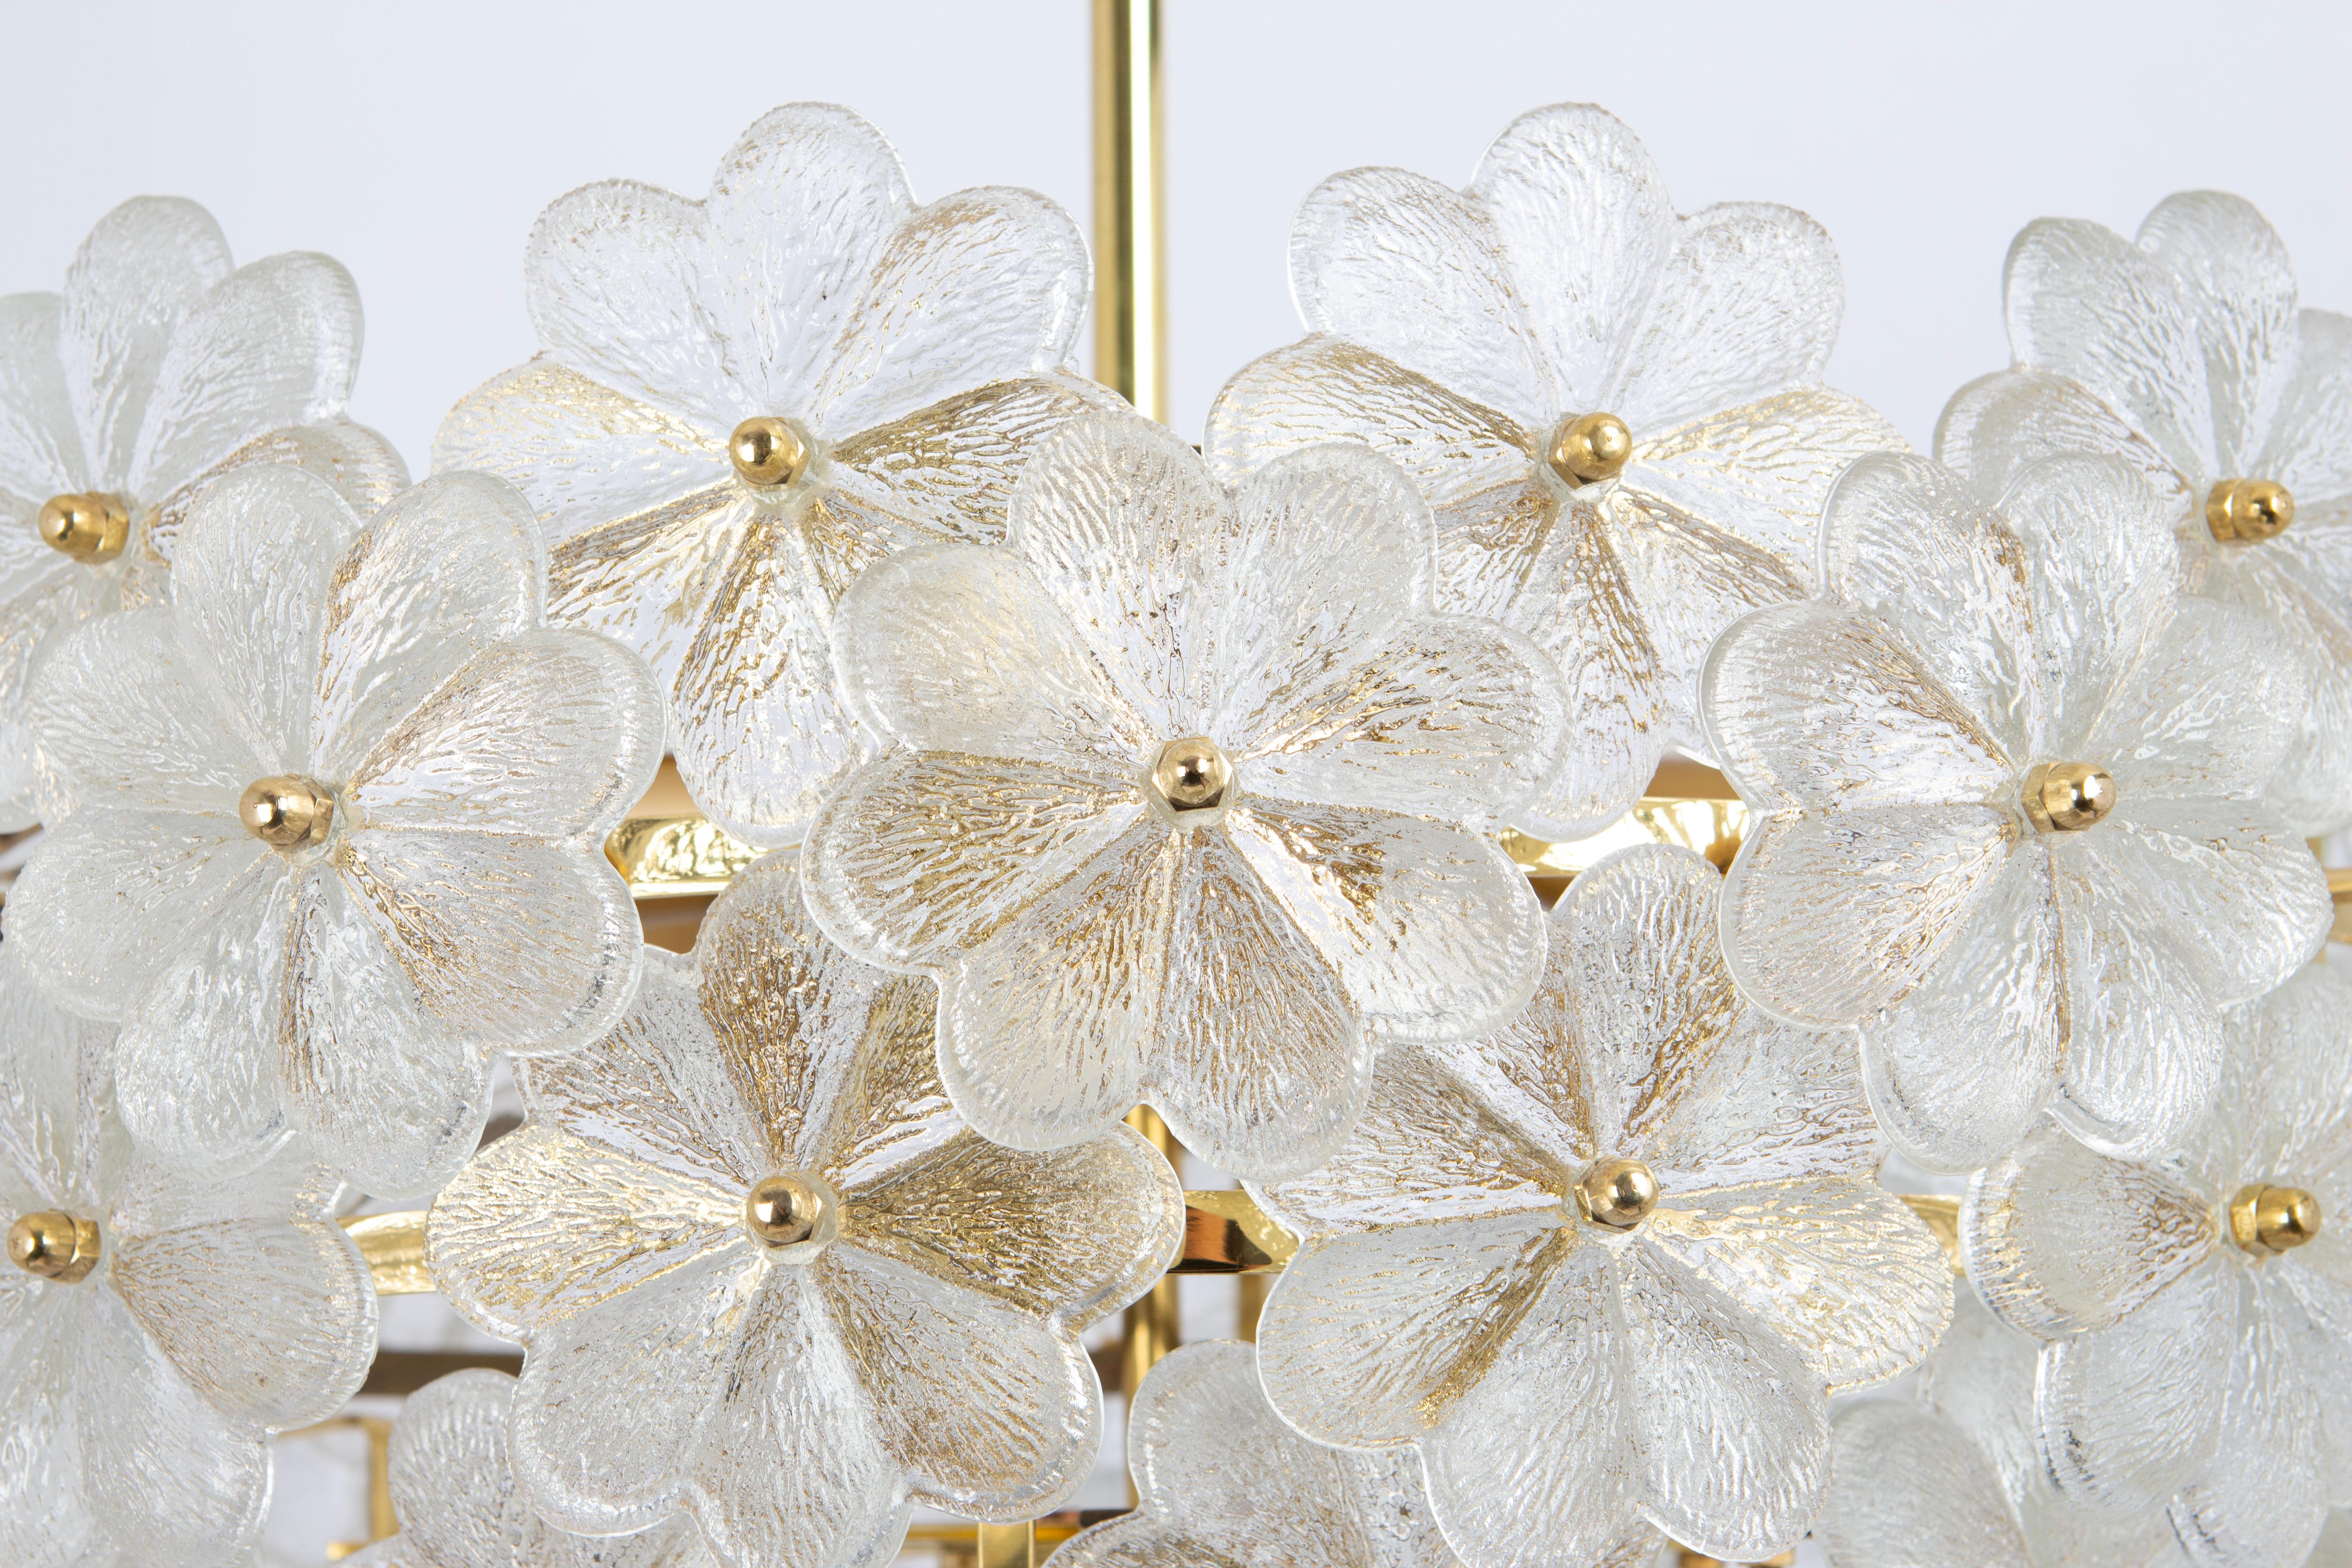 Large stunning chandelier with many Murano flower crystal glass over a brass frame, made by Ernst Palme in Germany, 1970s.
High quality and in very good condition. Cleaned, well-wired and ready to use. 

The chandelier requires 8 x E14 small bulbs